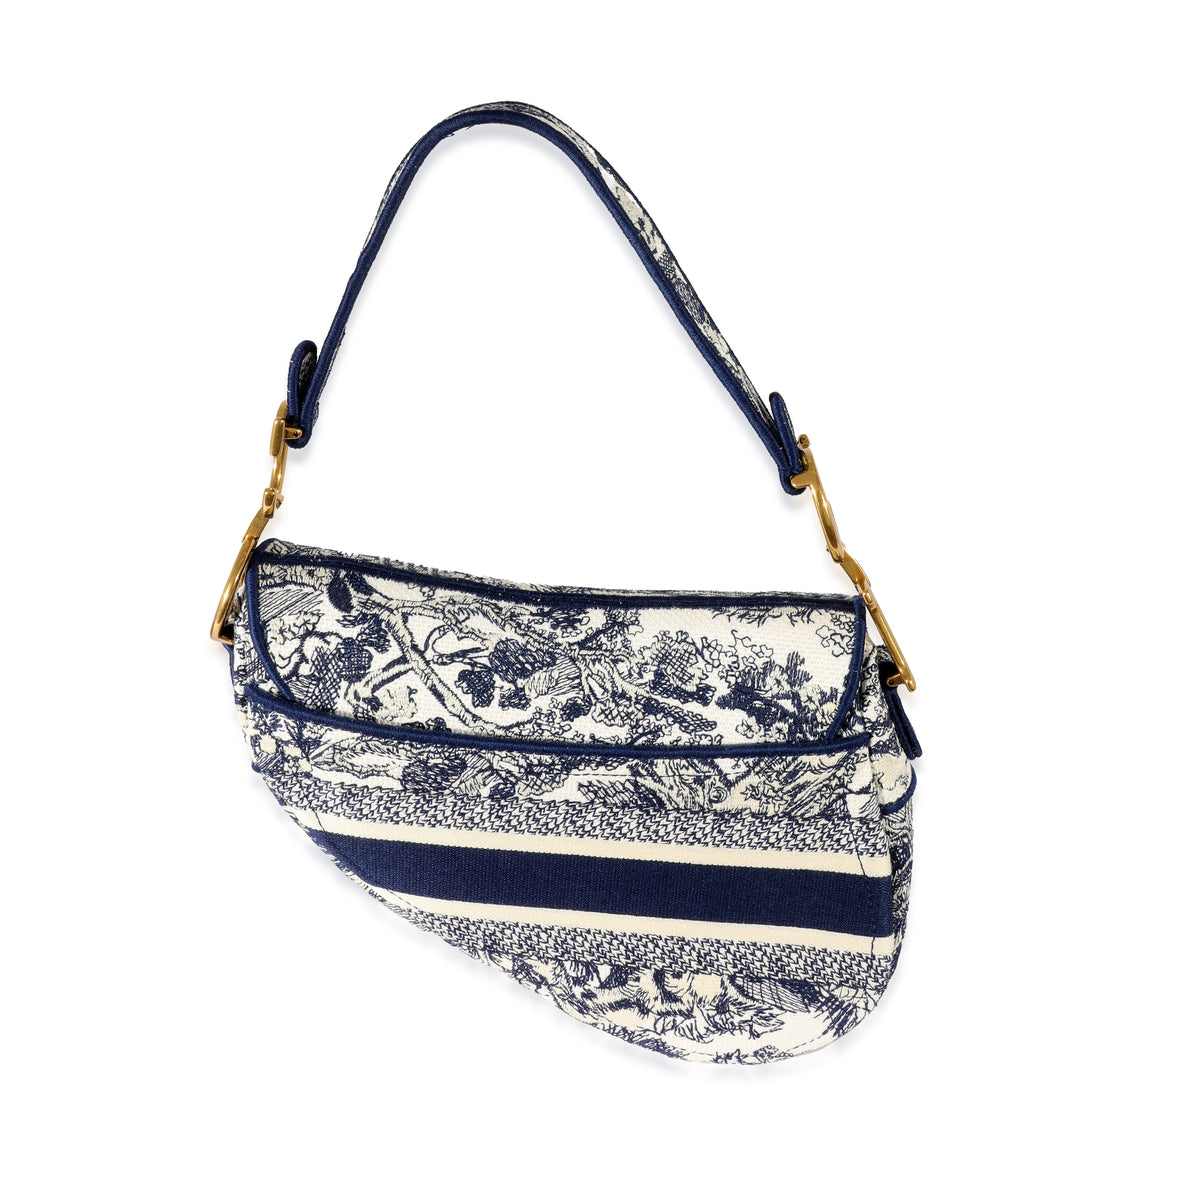 CHRISTIAN DIOR Canvas Embroidered Toile de Jouy Saddle Bag Gray 1206185